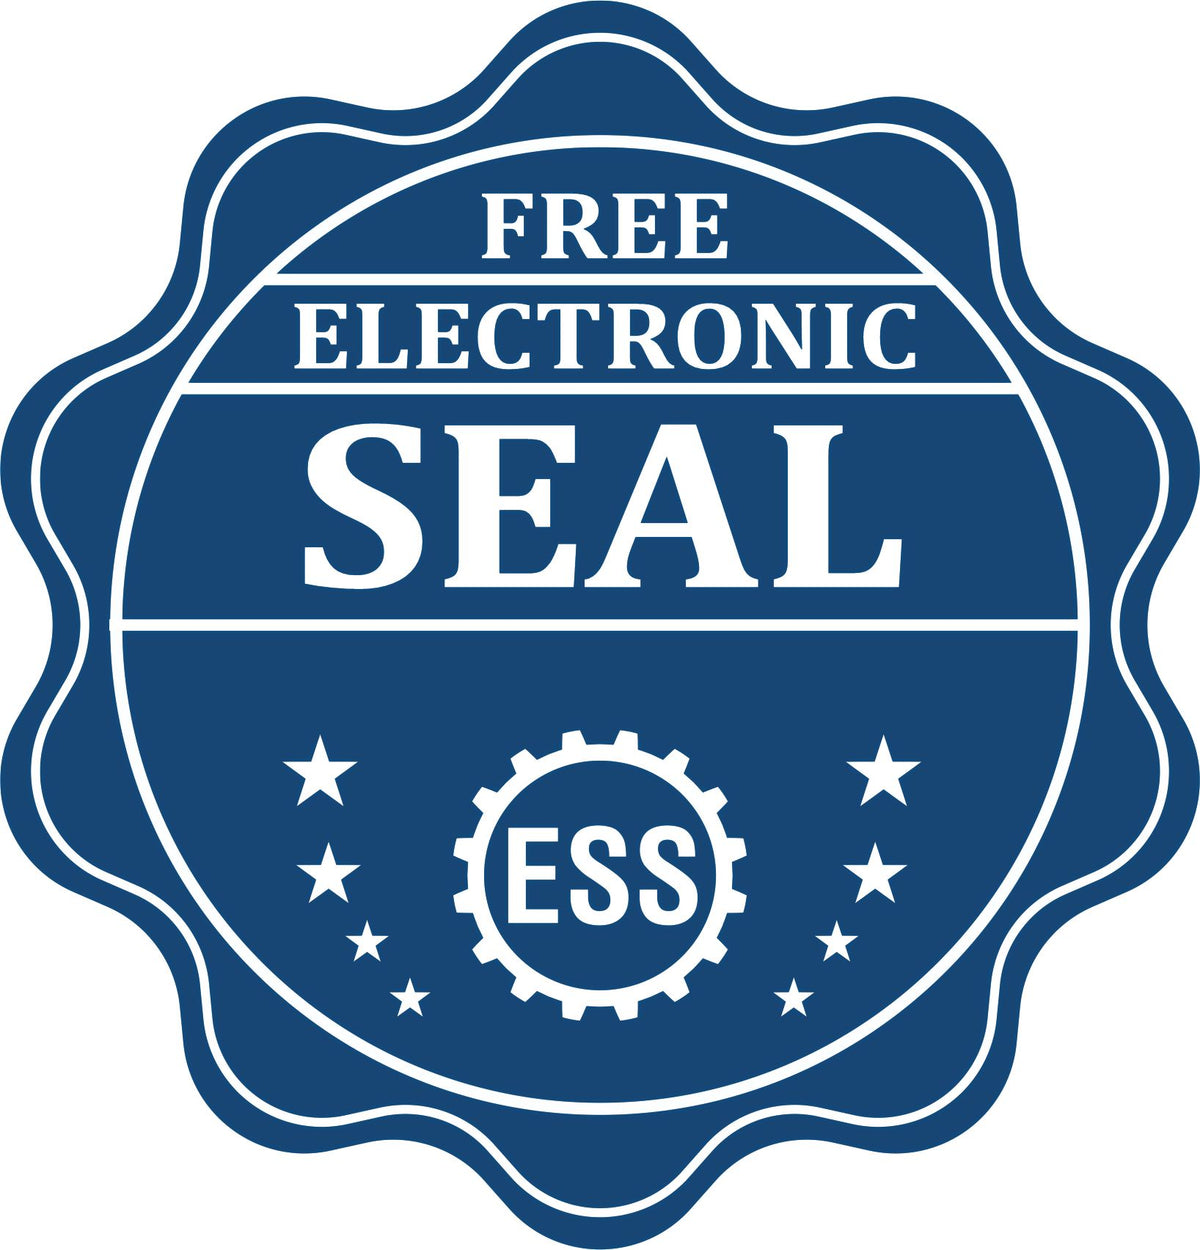 A badge showing a free electronic seal for the Slim Pre-Inked Alaska Landscape Architect Seal Stamp with stars and the ESS gear on the emblem.